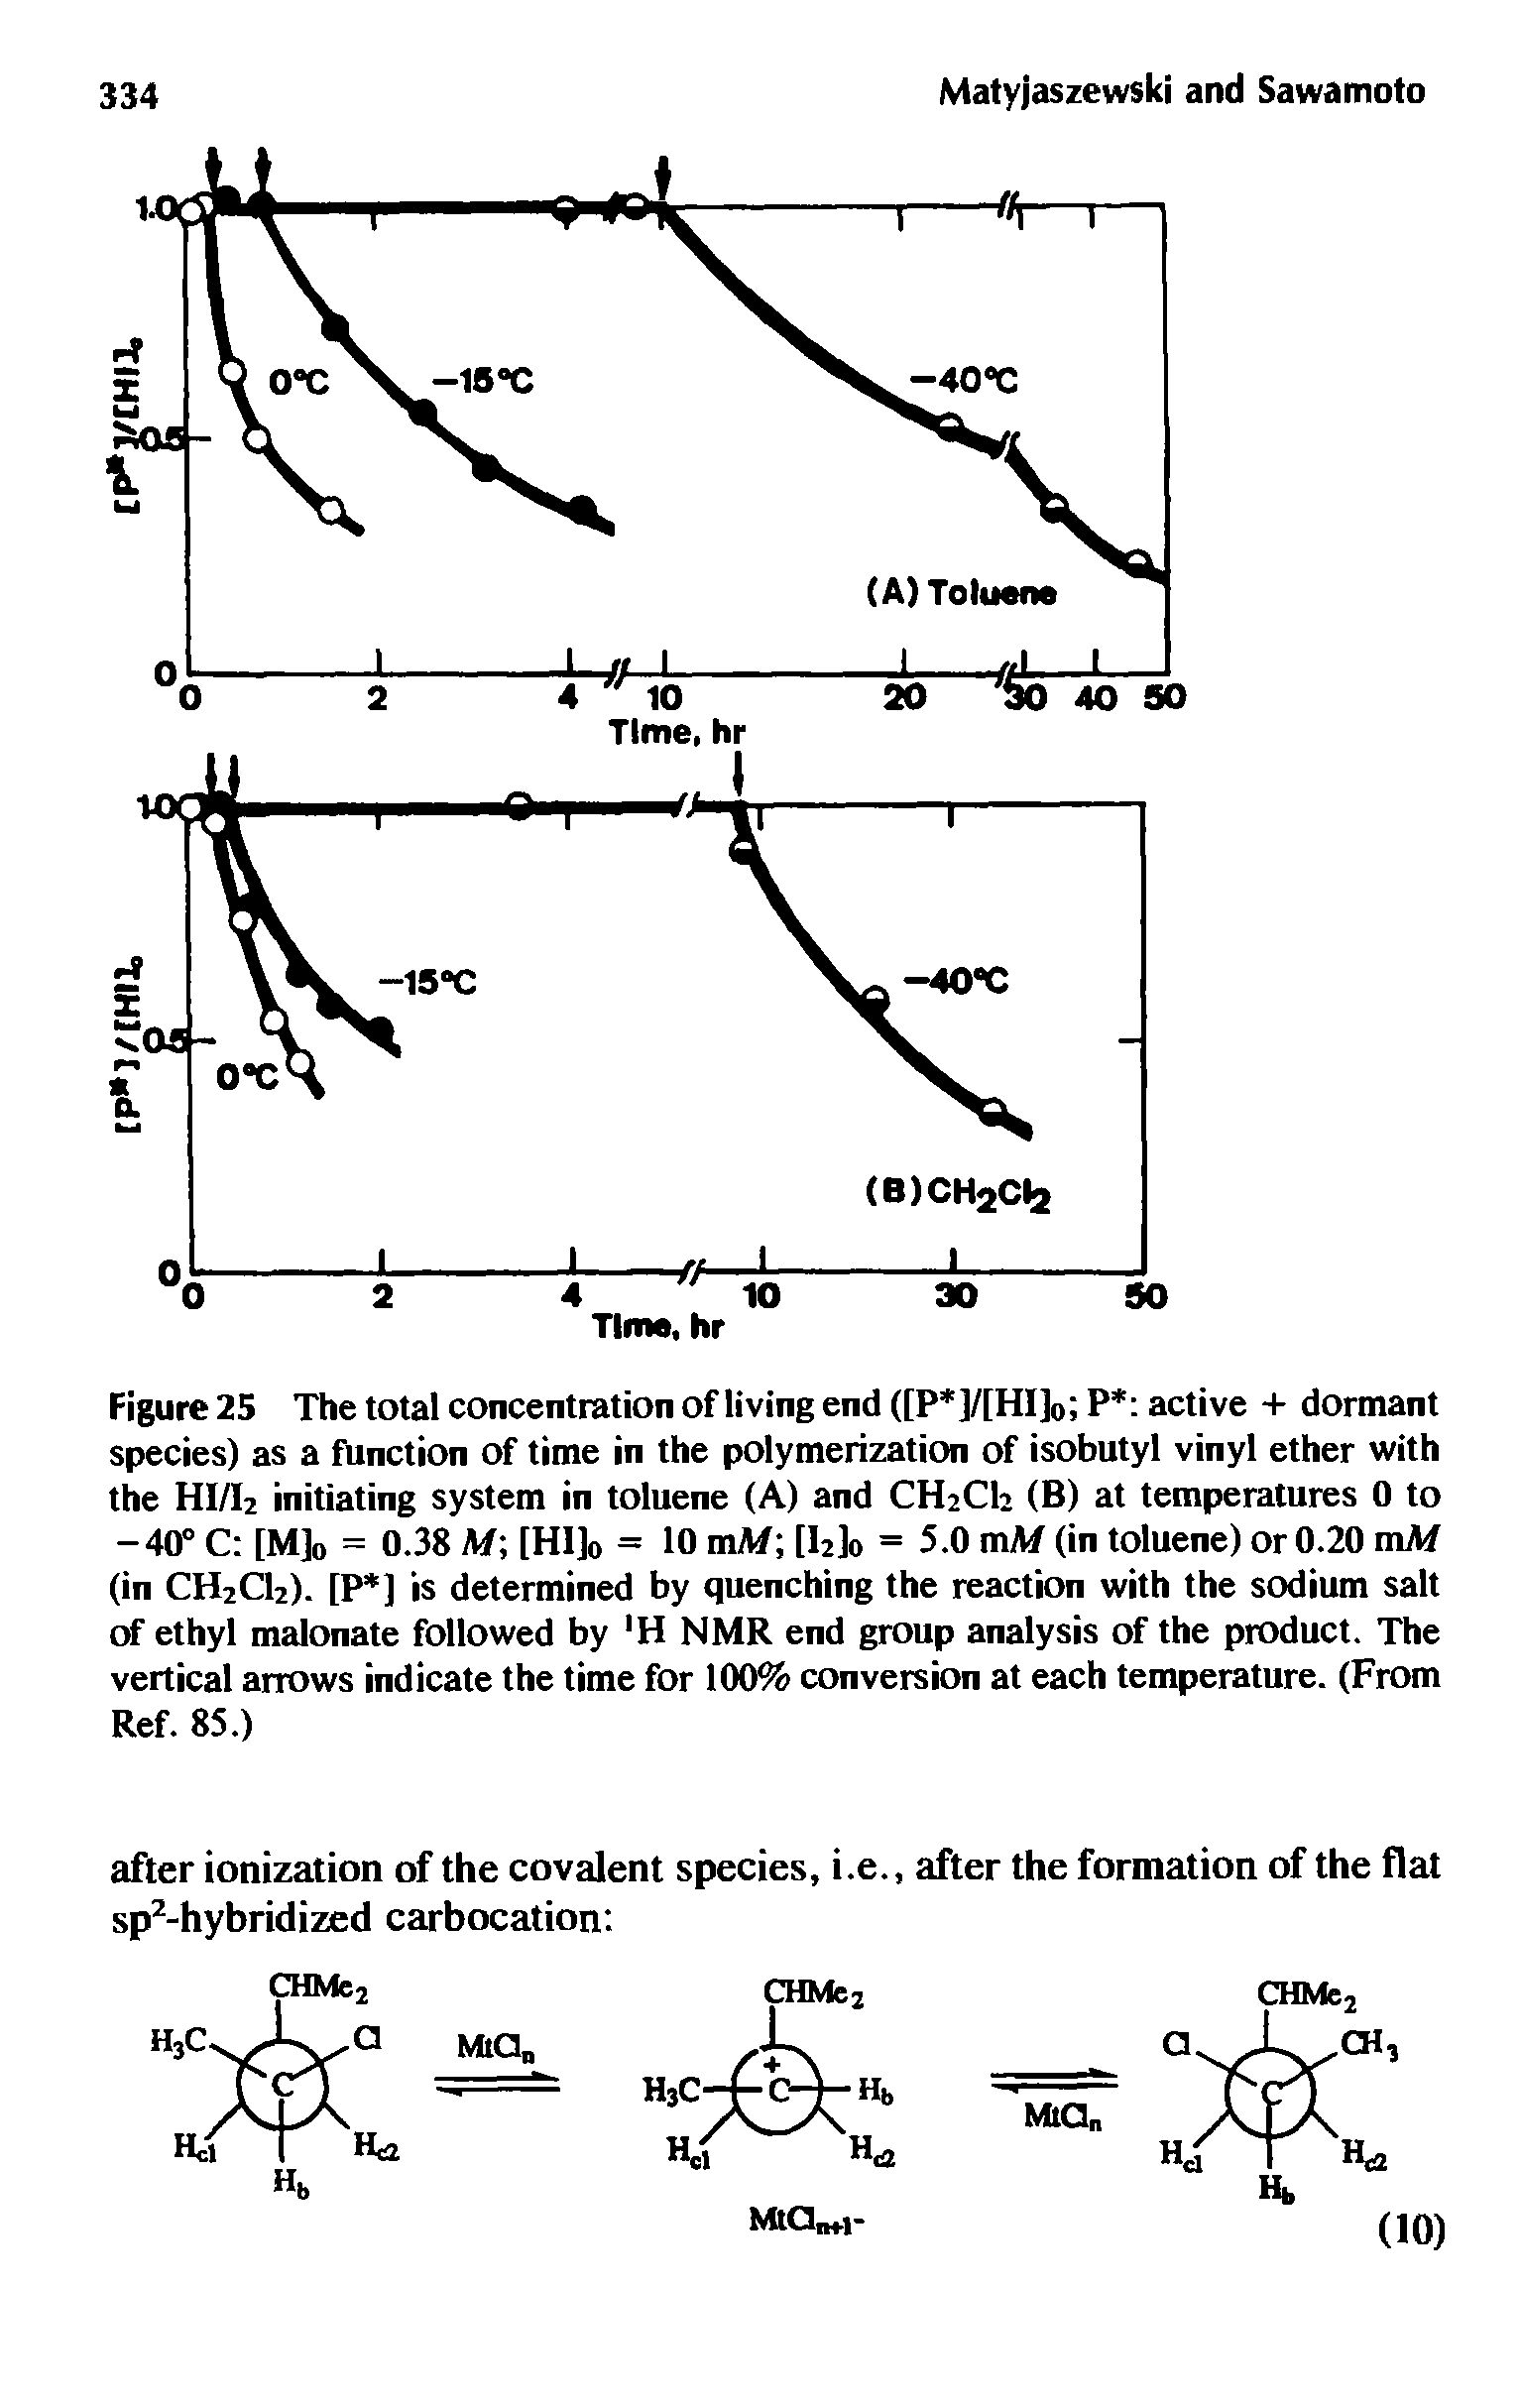 Figure 25 The total concentration of living end ([P ]/[HI]0 P active + dormant species) as a function of time in the polymerization of isobutyl vinyl ether with the HI/I2 initiating system in toluene (A) and CH2CI2 (B) at temperatures 0 to -40° C [M]0 = 0.38 M [HI]0 = 10 mM [I2]o = 5.0 mM (in toluene) or 0.20 mM (in CH2CI2). [P ] is determined by quenching the reaction with the sodium salt of ethyl malonate followed by H NMR end group analysis of the product. The vertical arrows indicate the time for 100% conversion at each temperature. (From Ref. 85.)...